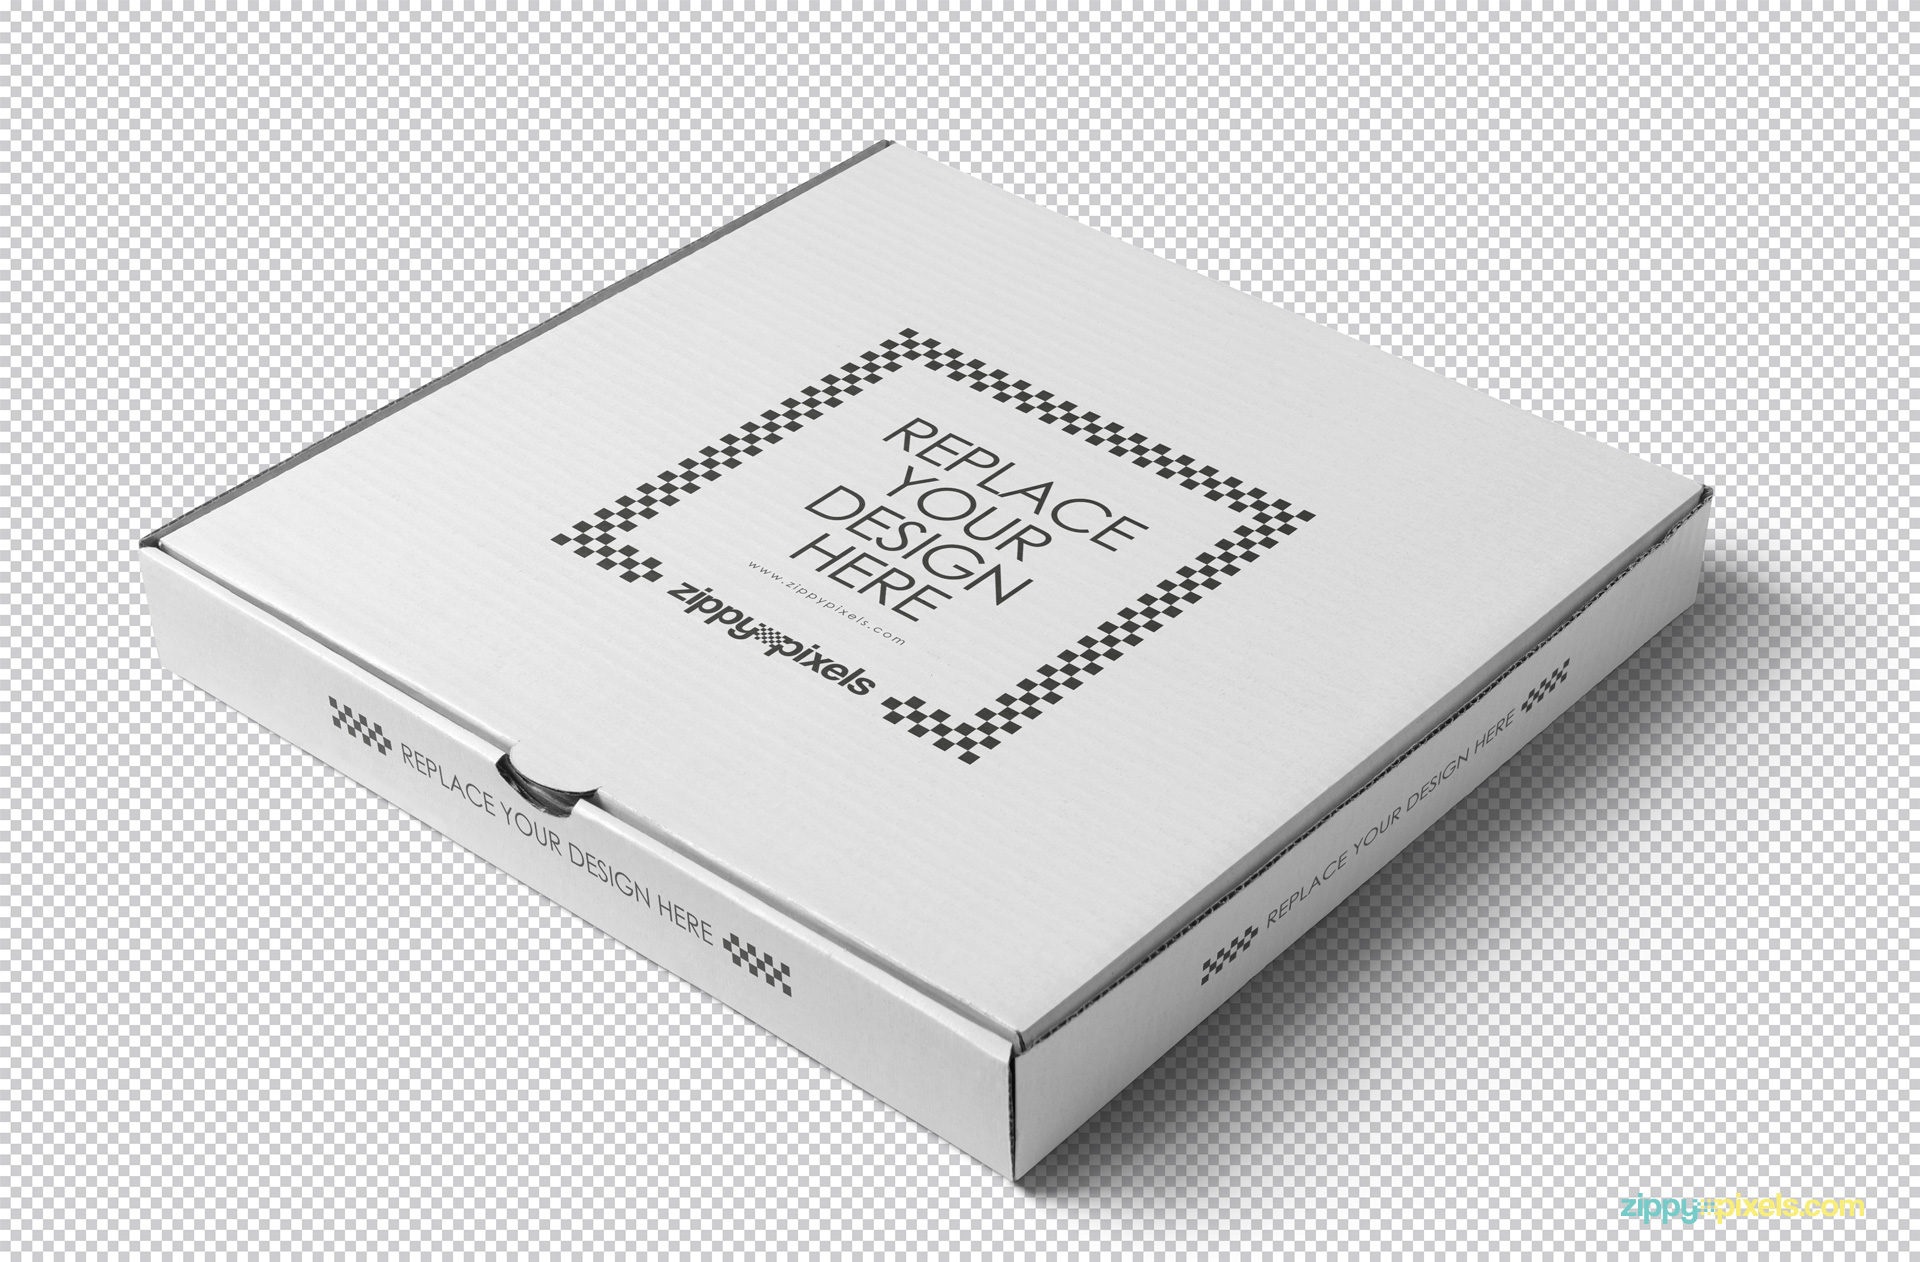 Use smart object option in Photoshop to place your designs in this plain pizza box.